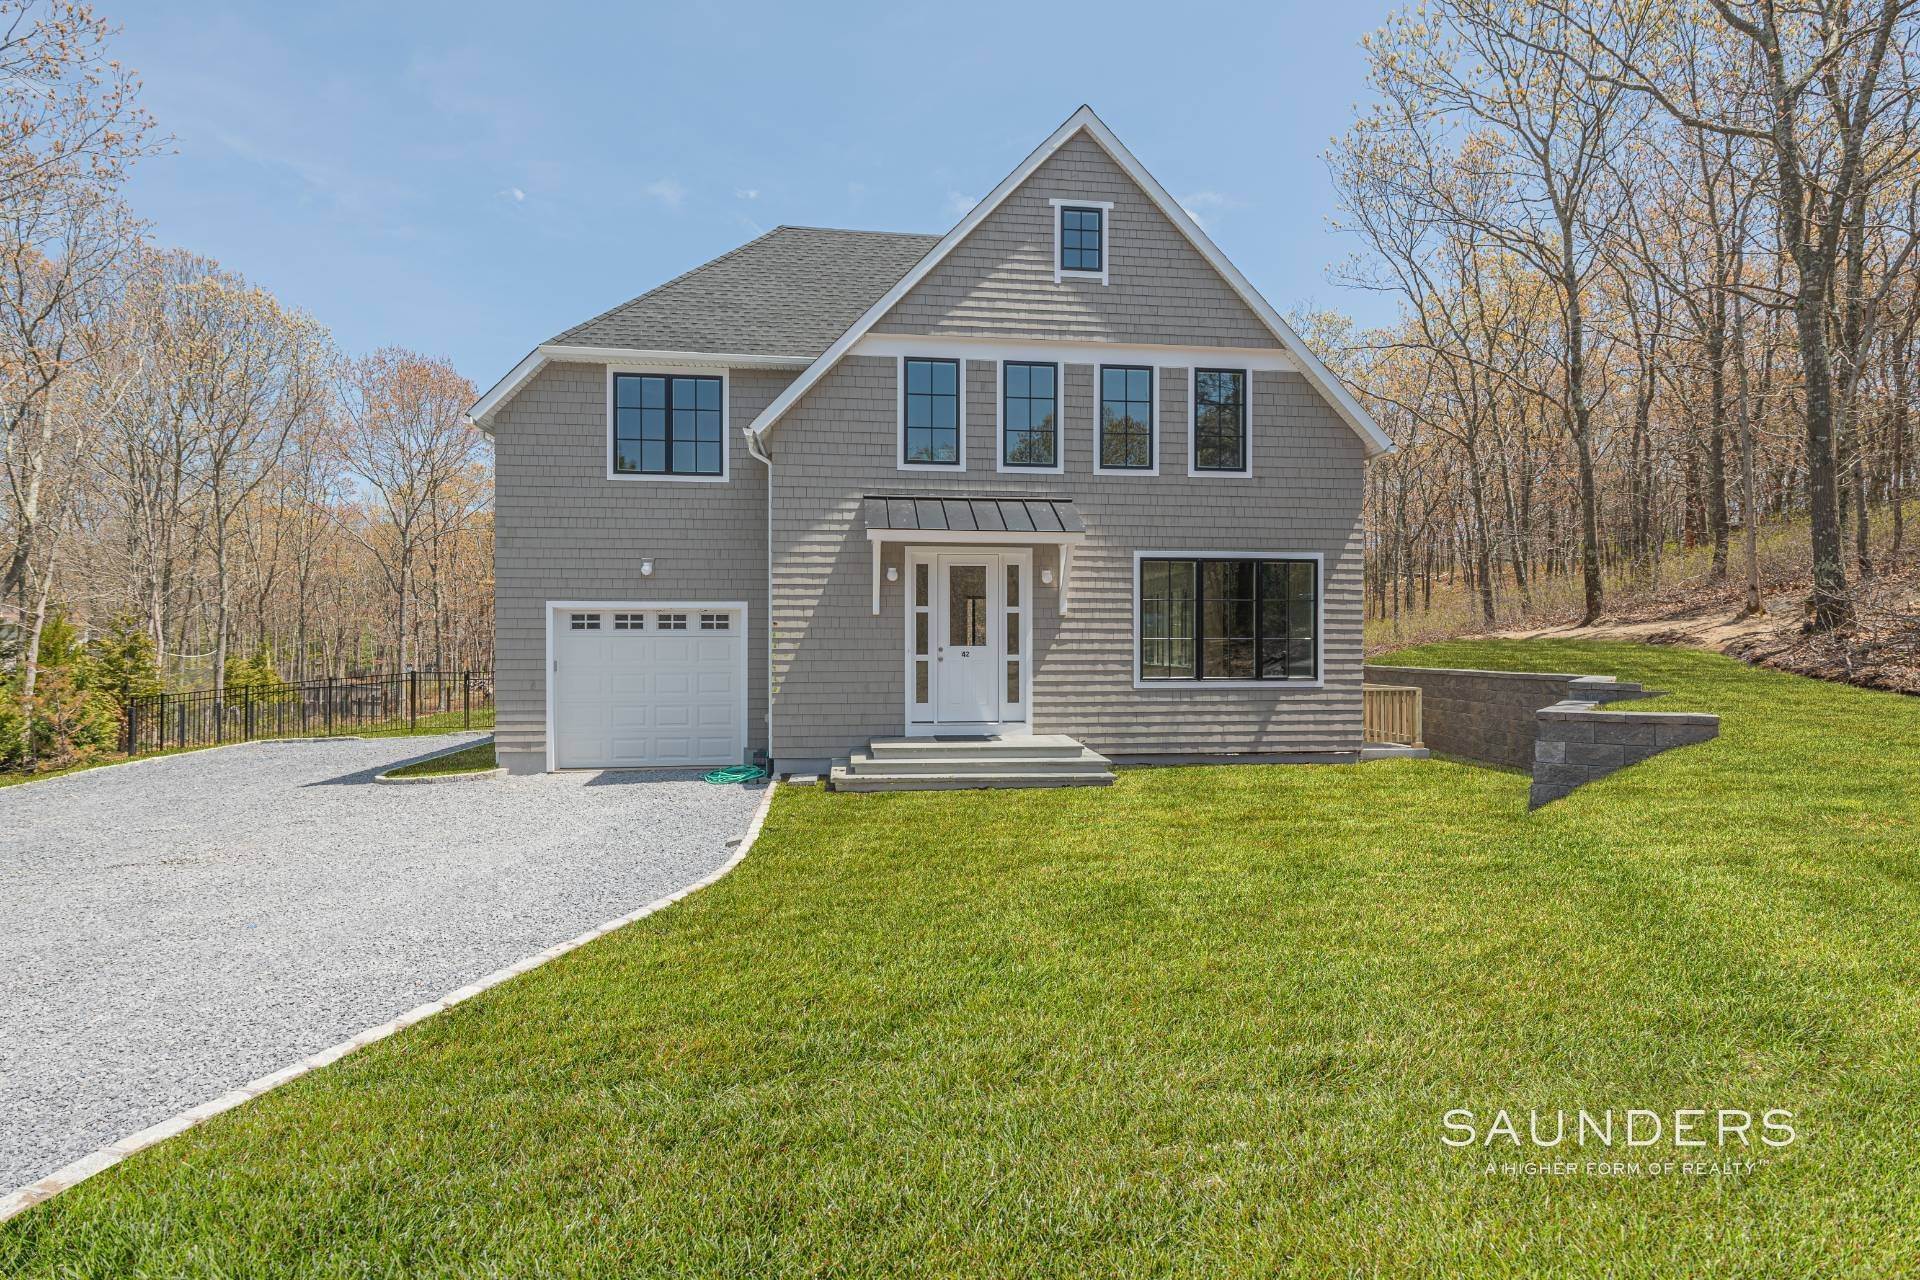 2. Single Family Homes for Sale at New Construction In Hampton Bays 42 Squires Boulevard, Hampton Bays, NY 11946